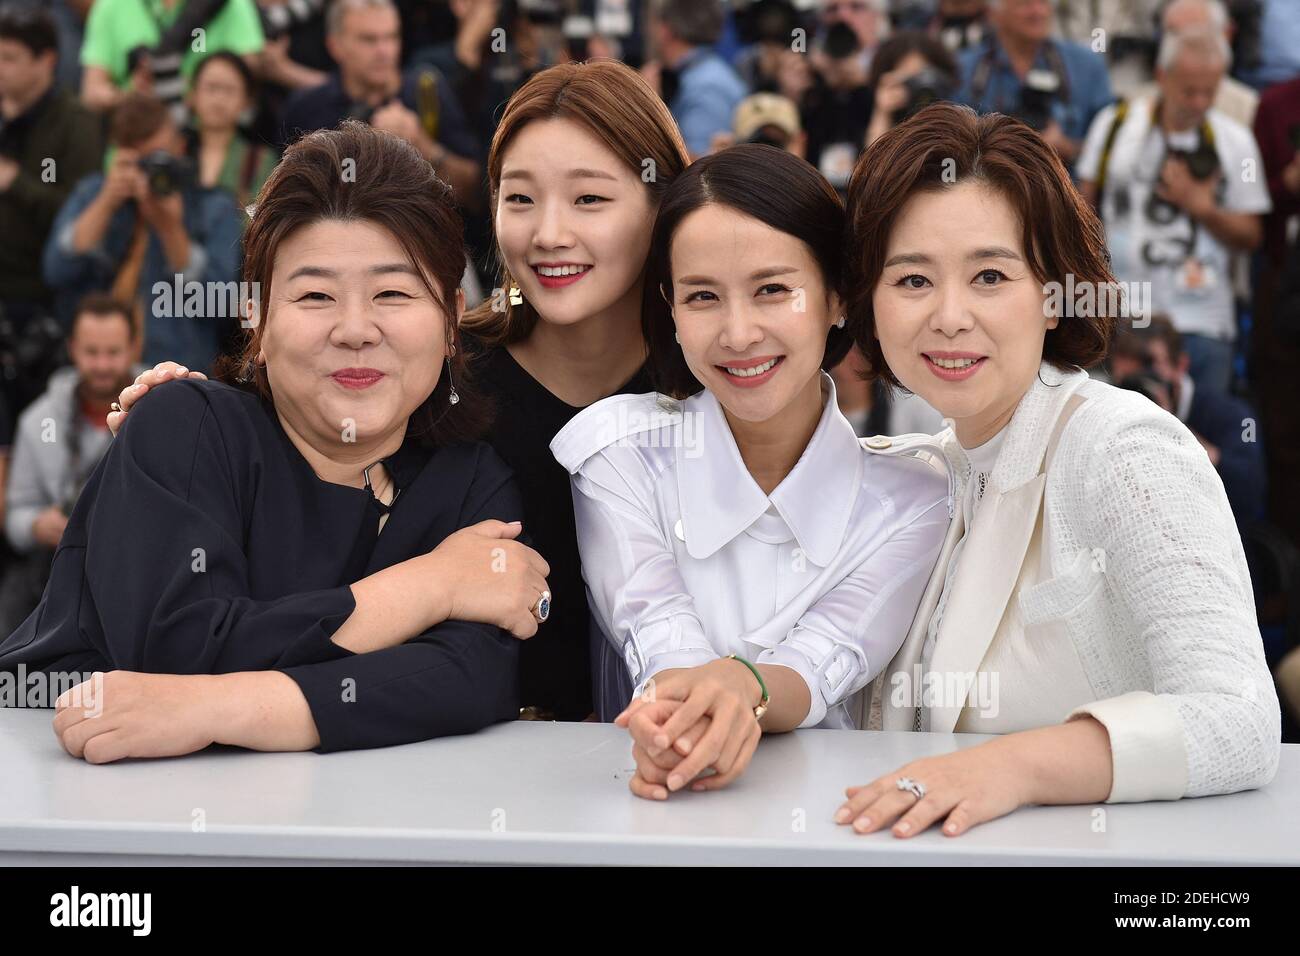 Lee Jung-Eun, Park So-dam, Cho Yeo-jeong and Chang Hyae-Jin attend the photocall for 'Parasite' during the 72nd annual Cannes Film Festival on May 22, 2019 in Cannes, France Stock Photo